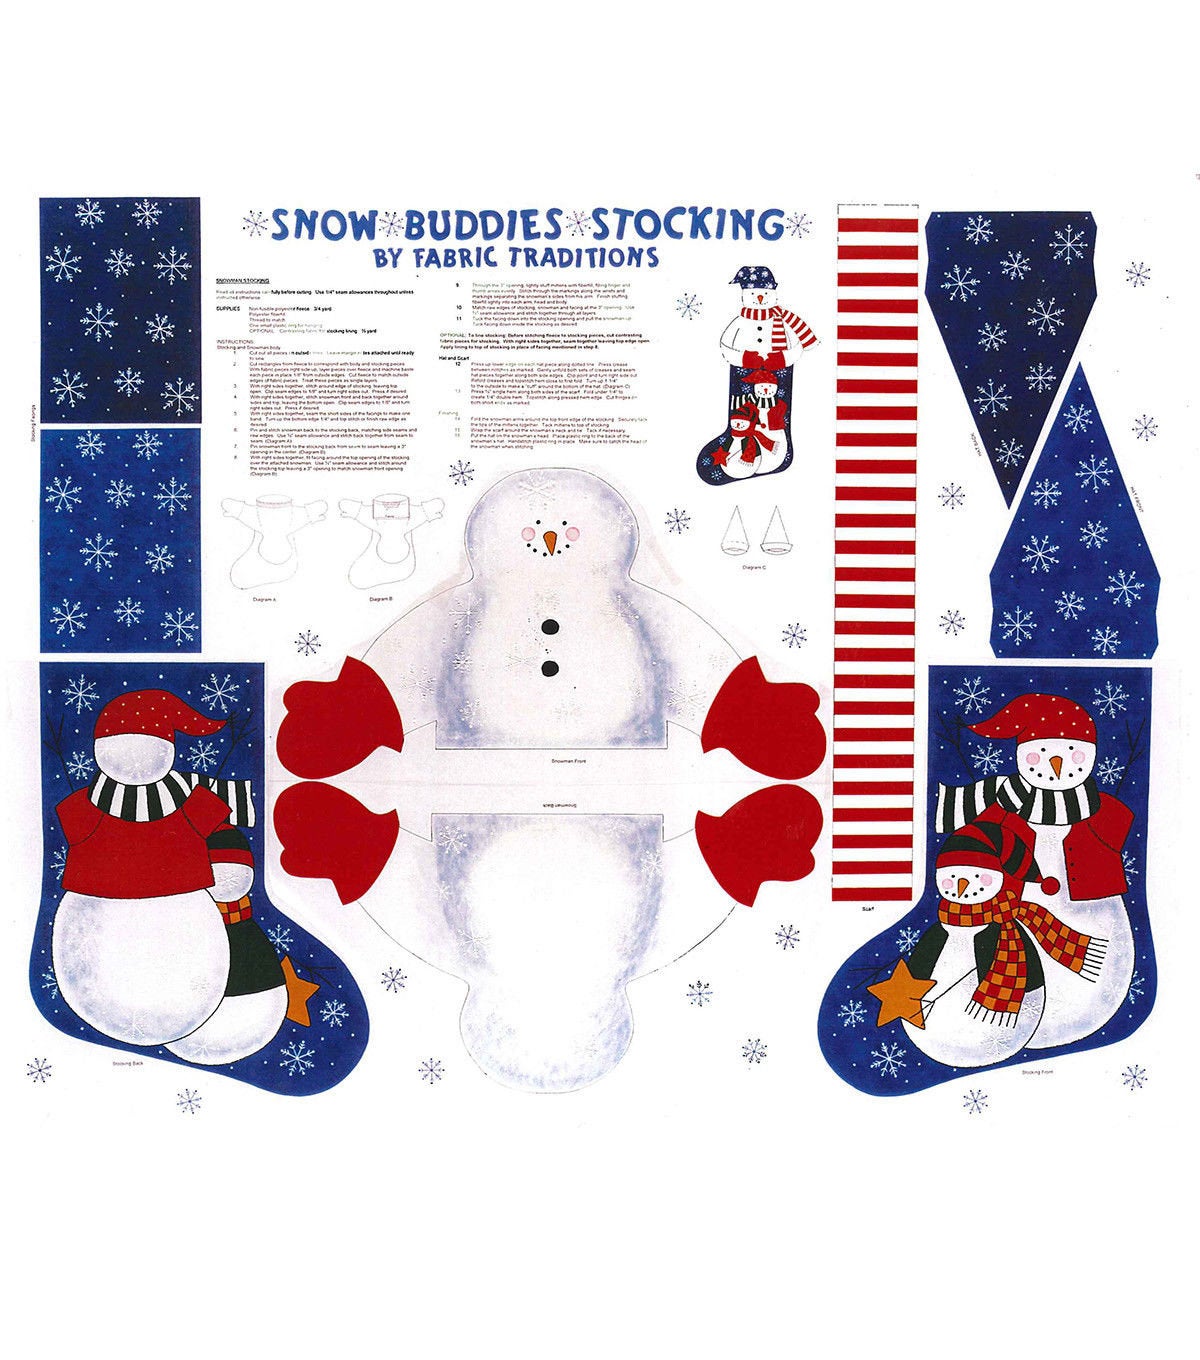 Snow Buddies Stocking Panel by Fabric Traditions